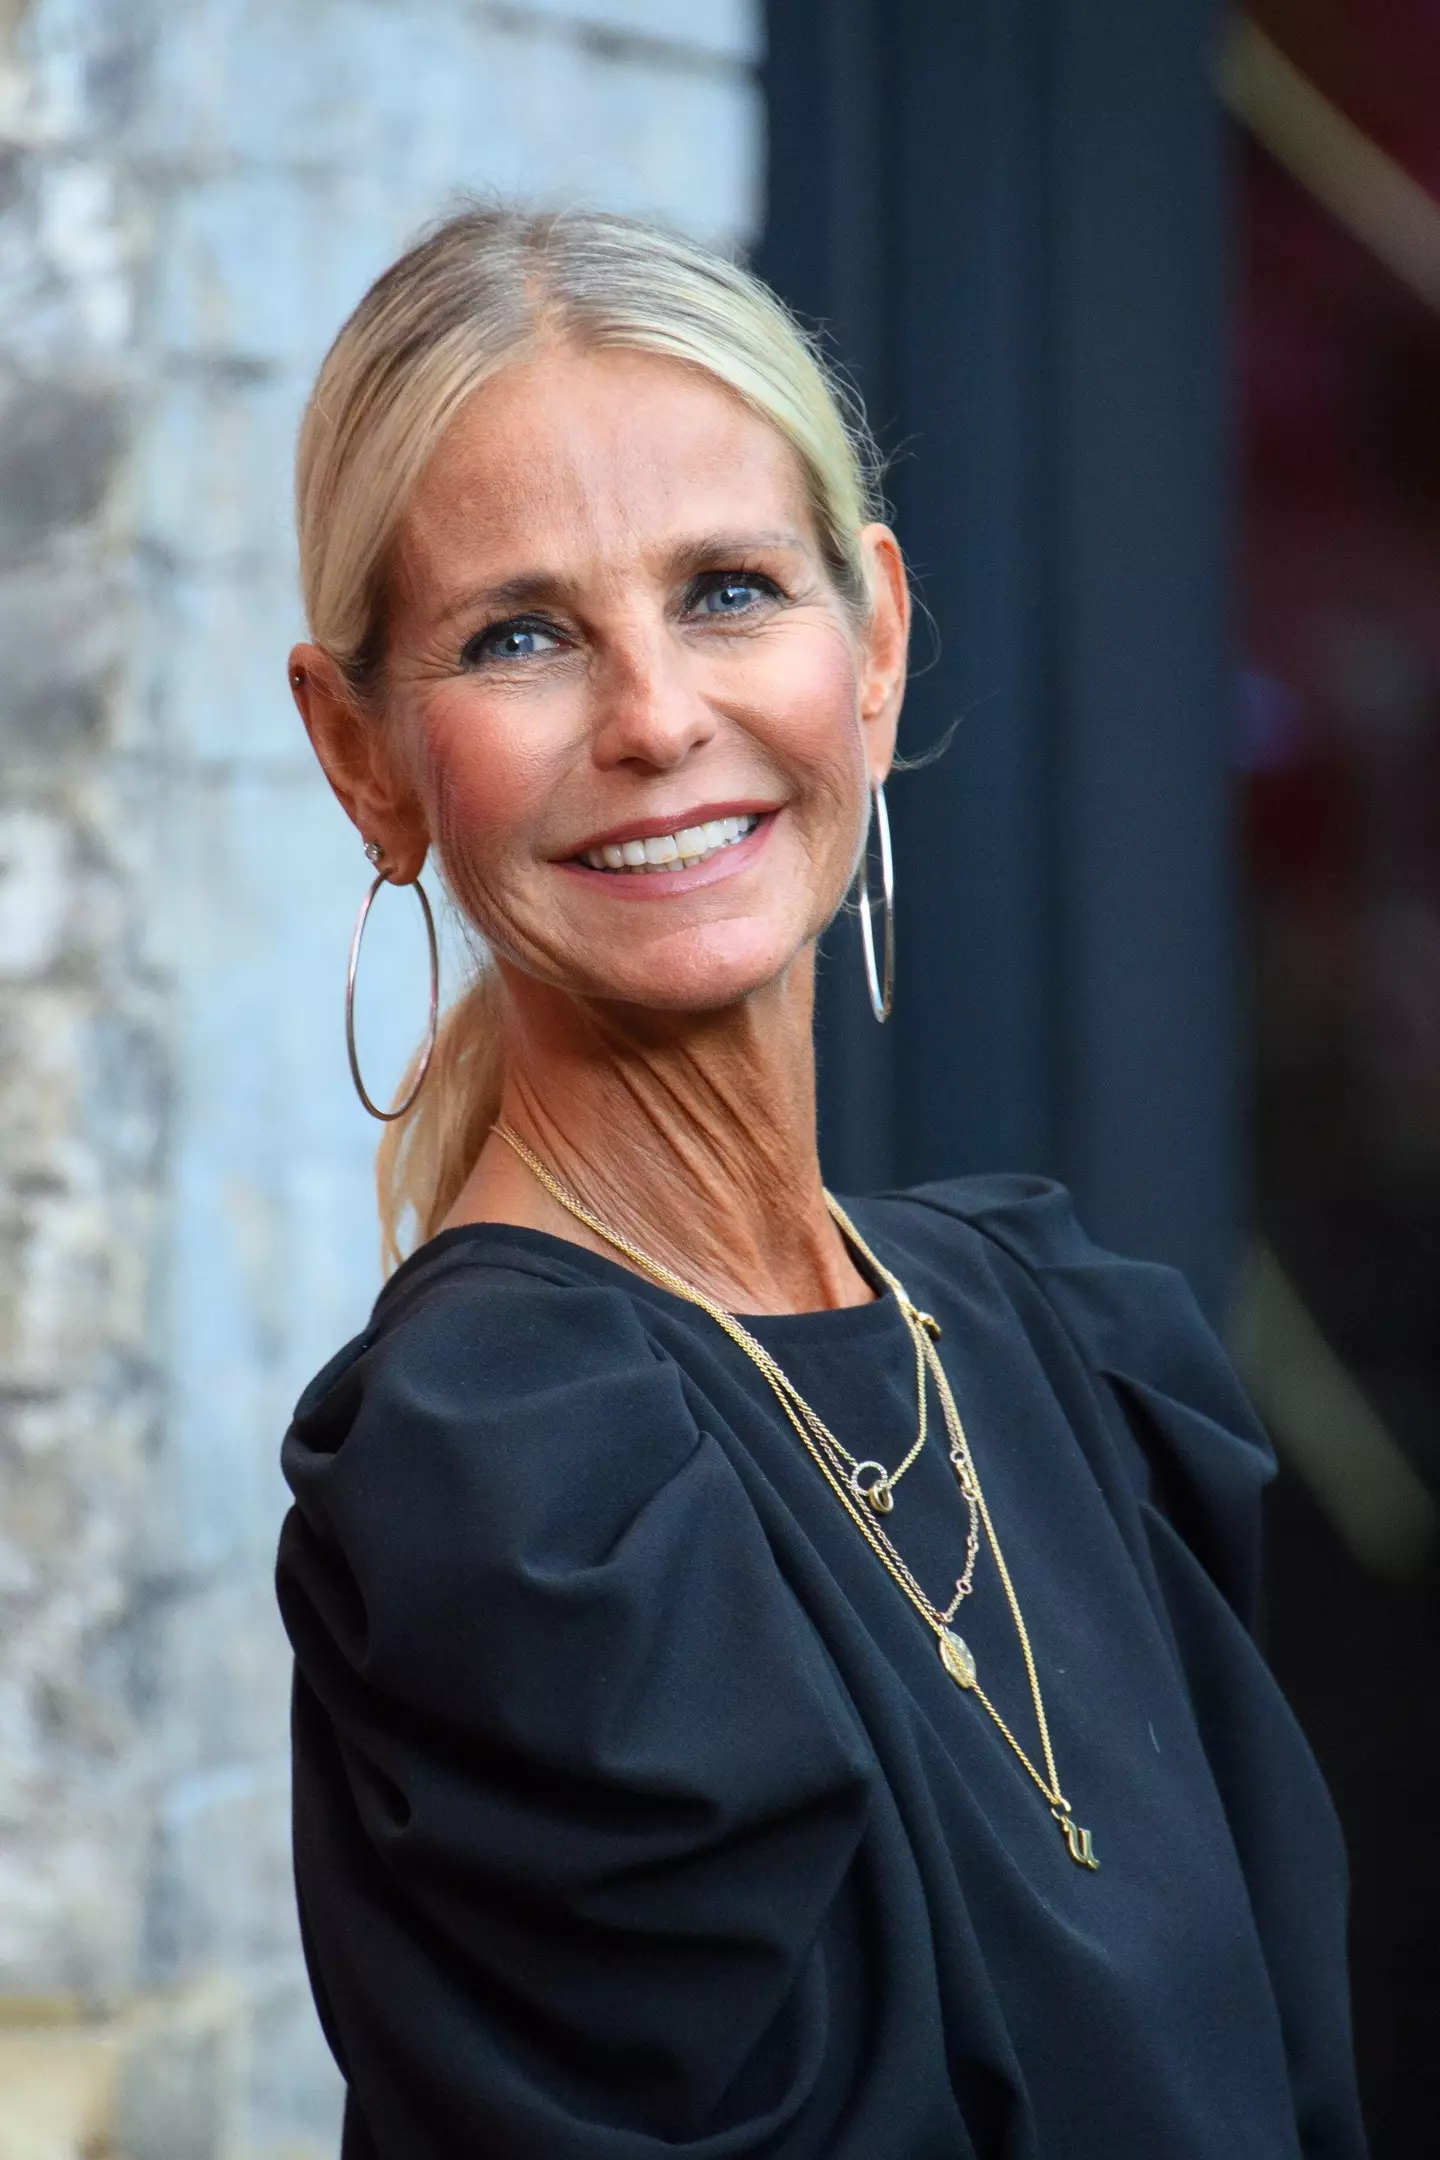 Ulrika Jonsson says she doesn't like looking in mirrors.